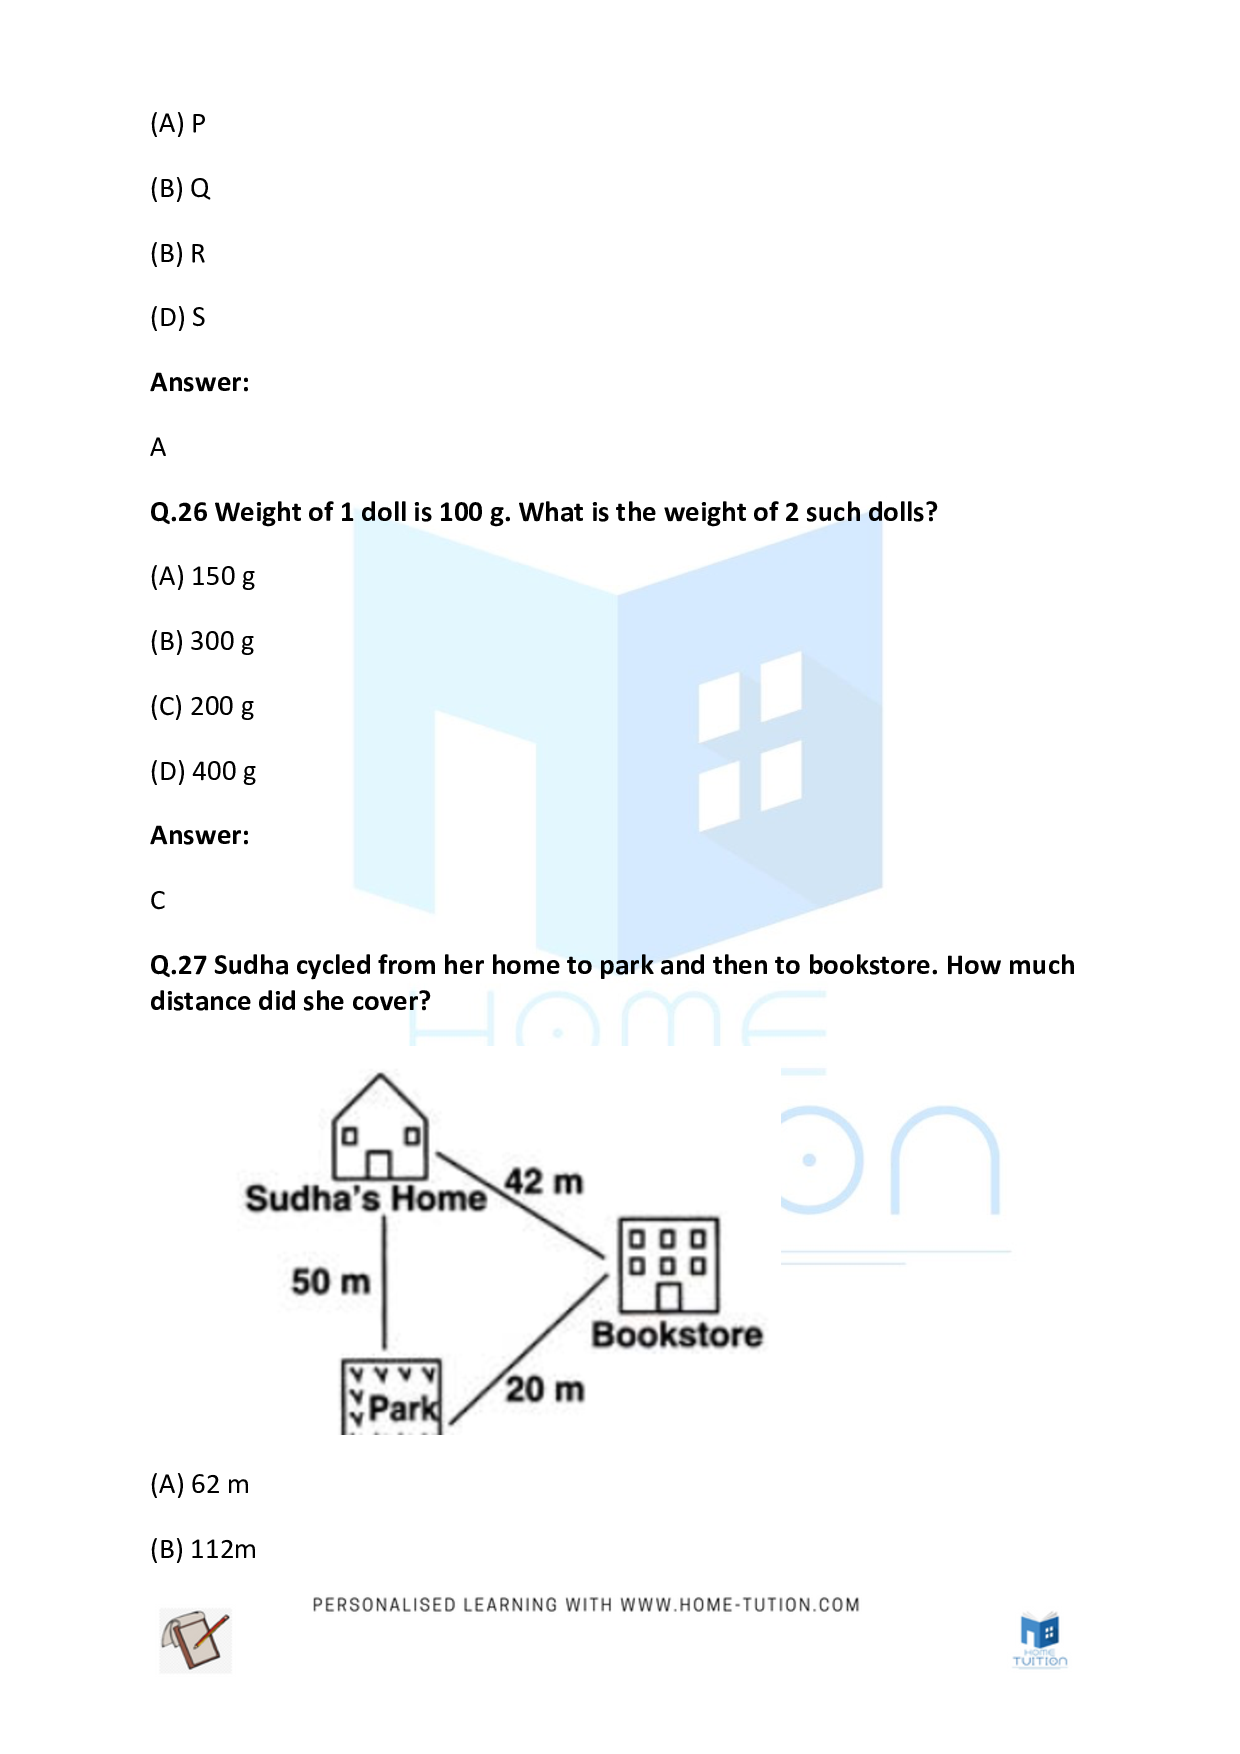 CBSE Class 2 Maths Length Weight and Capacity Worksheets 